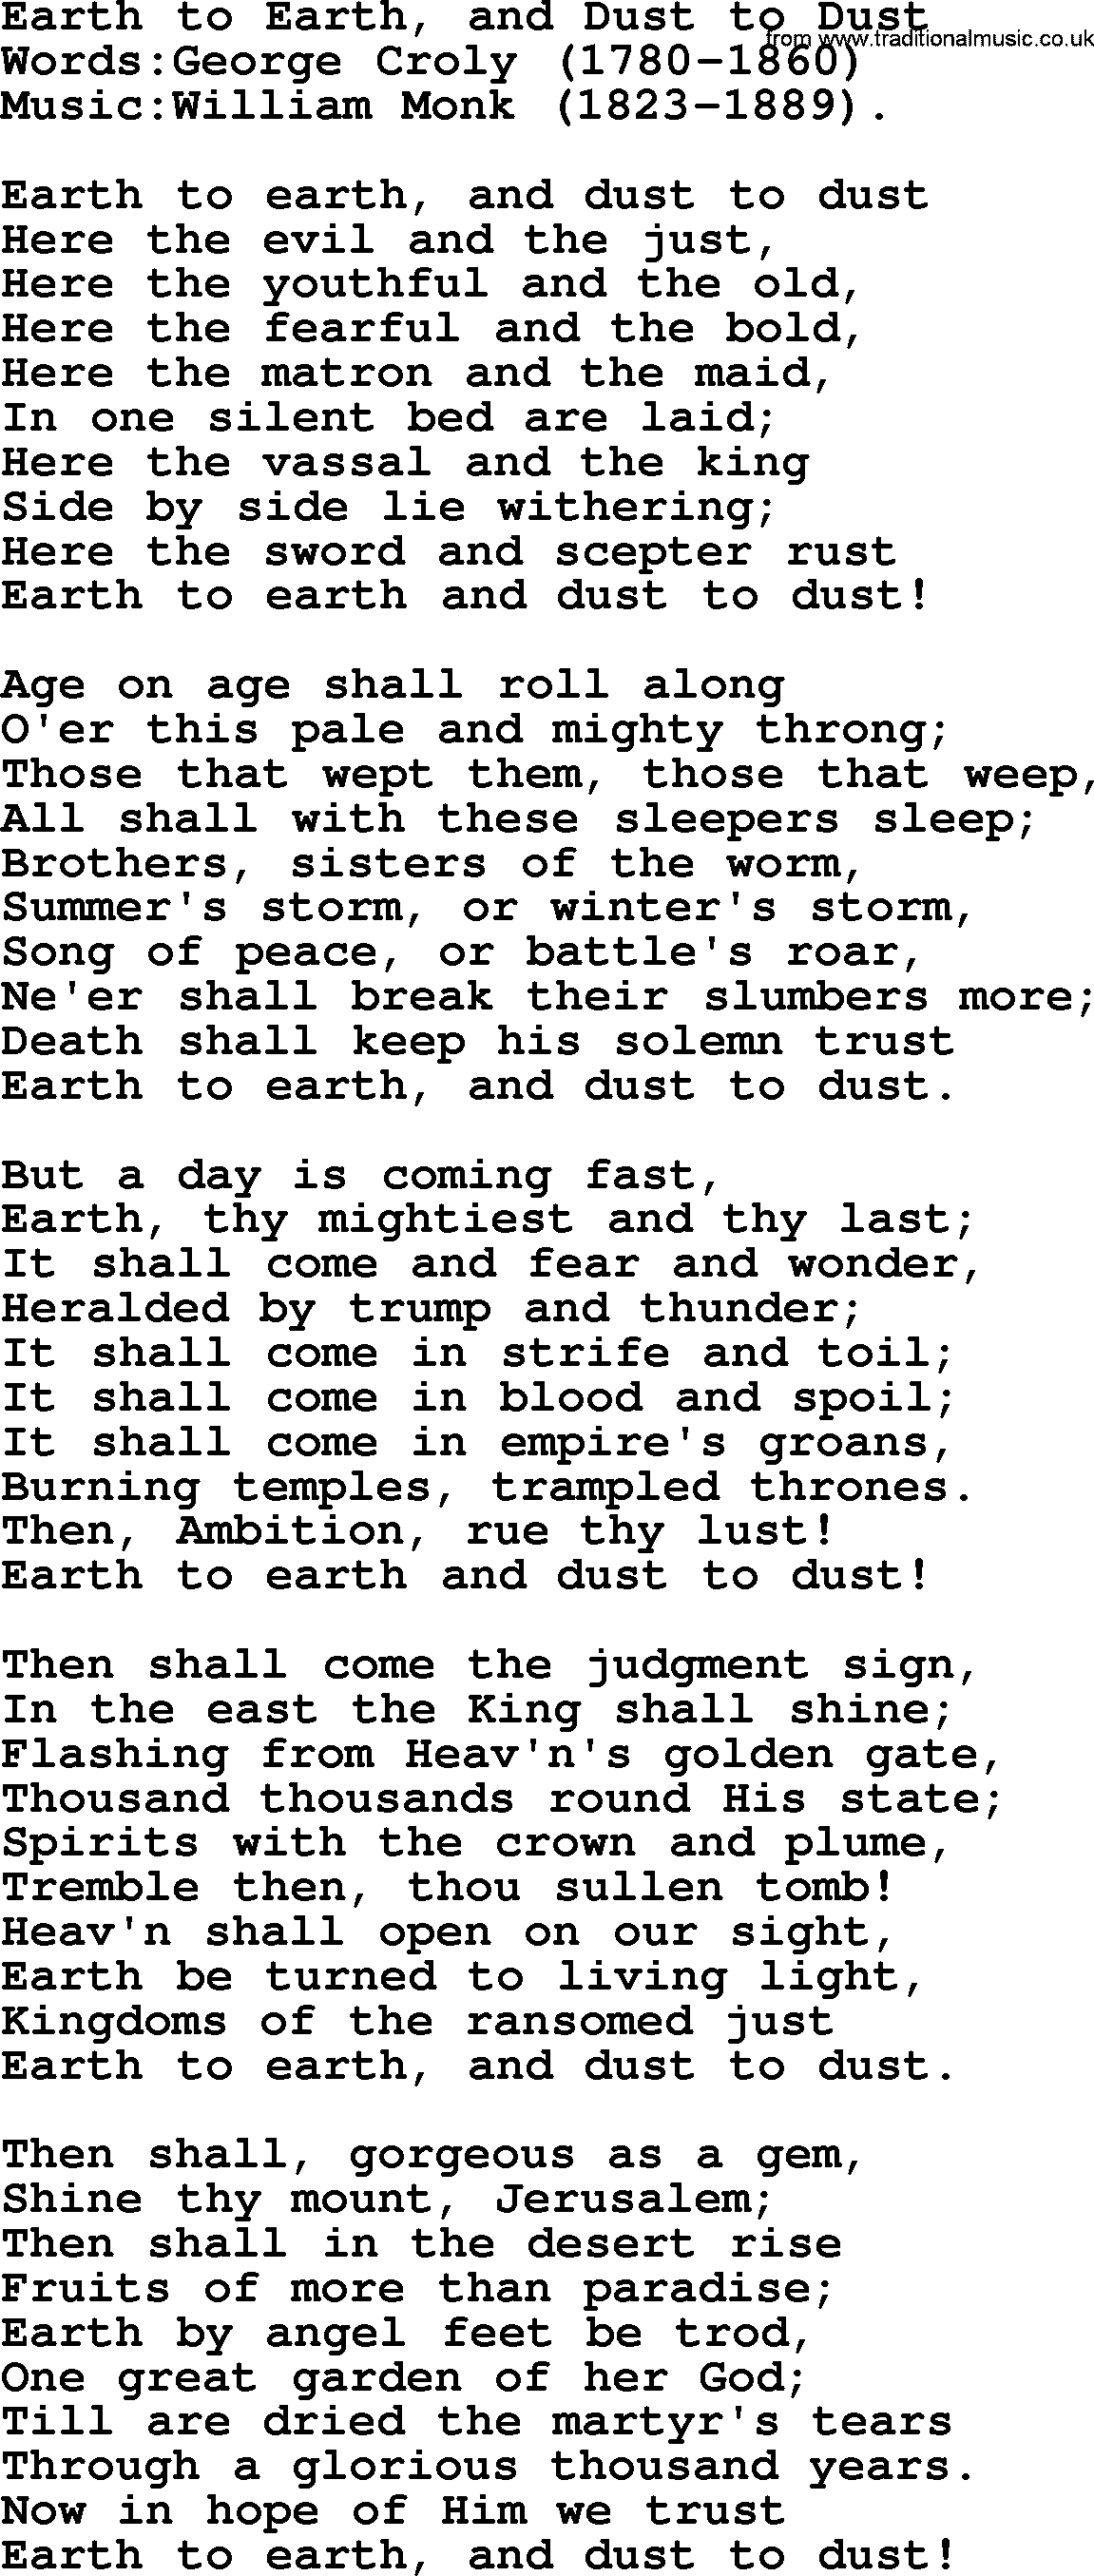 Christian hymns and songs about Jesus' Return(The Second Coming): Earth To Earth, And Dust To Dust, lyrics with PDF